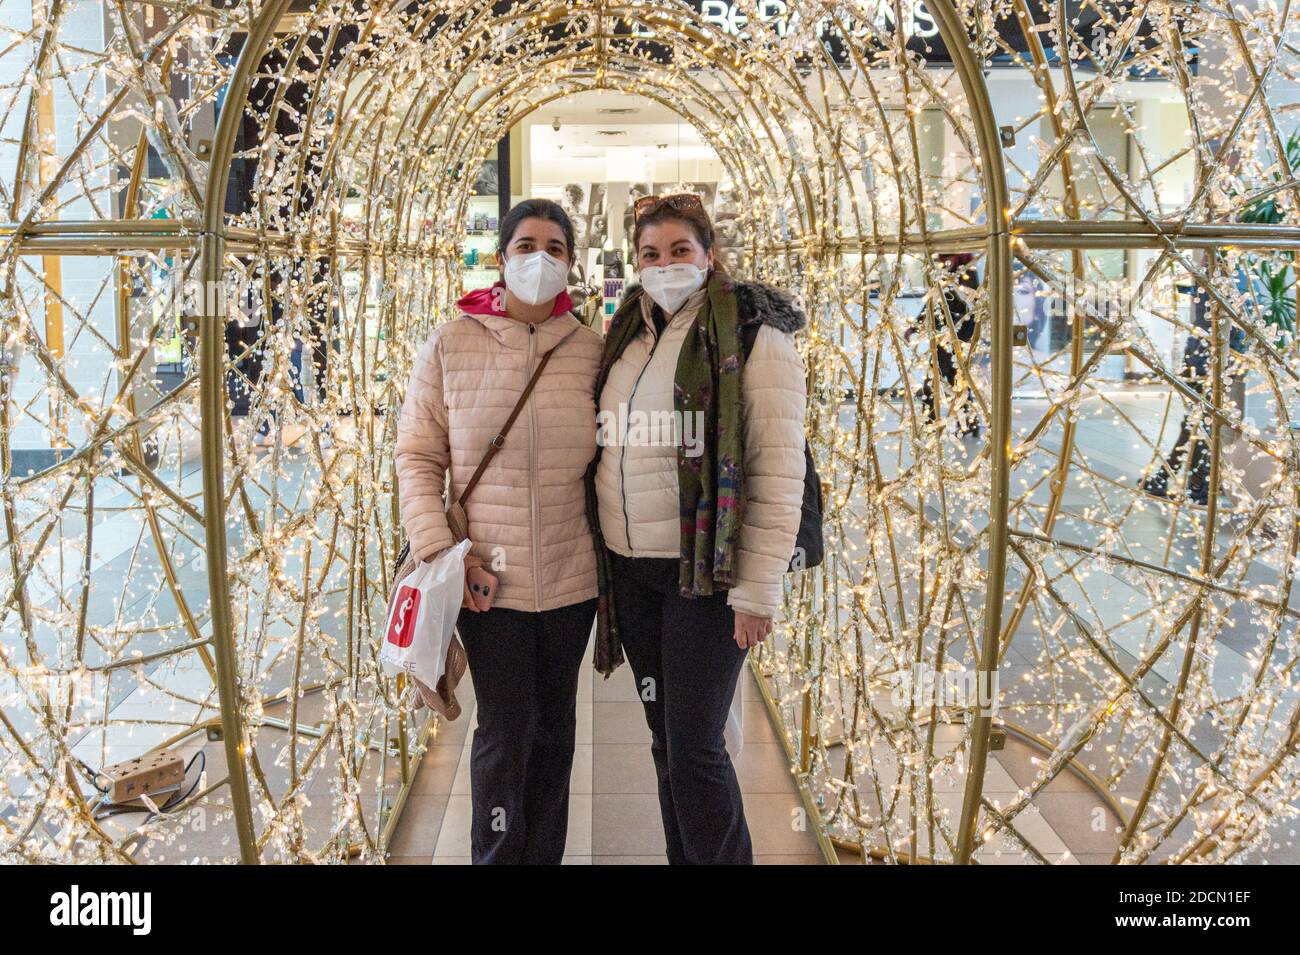 Portrait of mother and daughter in a mall Christmas lights during the Covid-19 pandemic Stock Photo